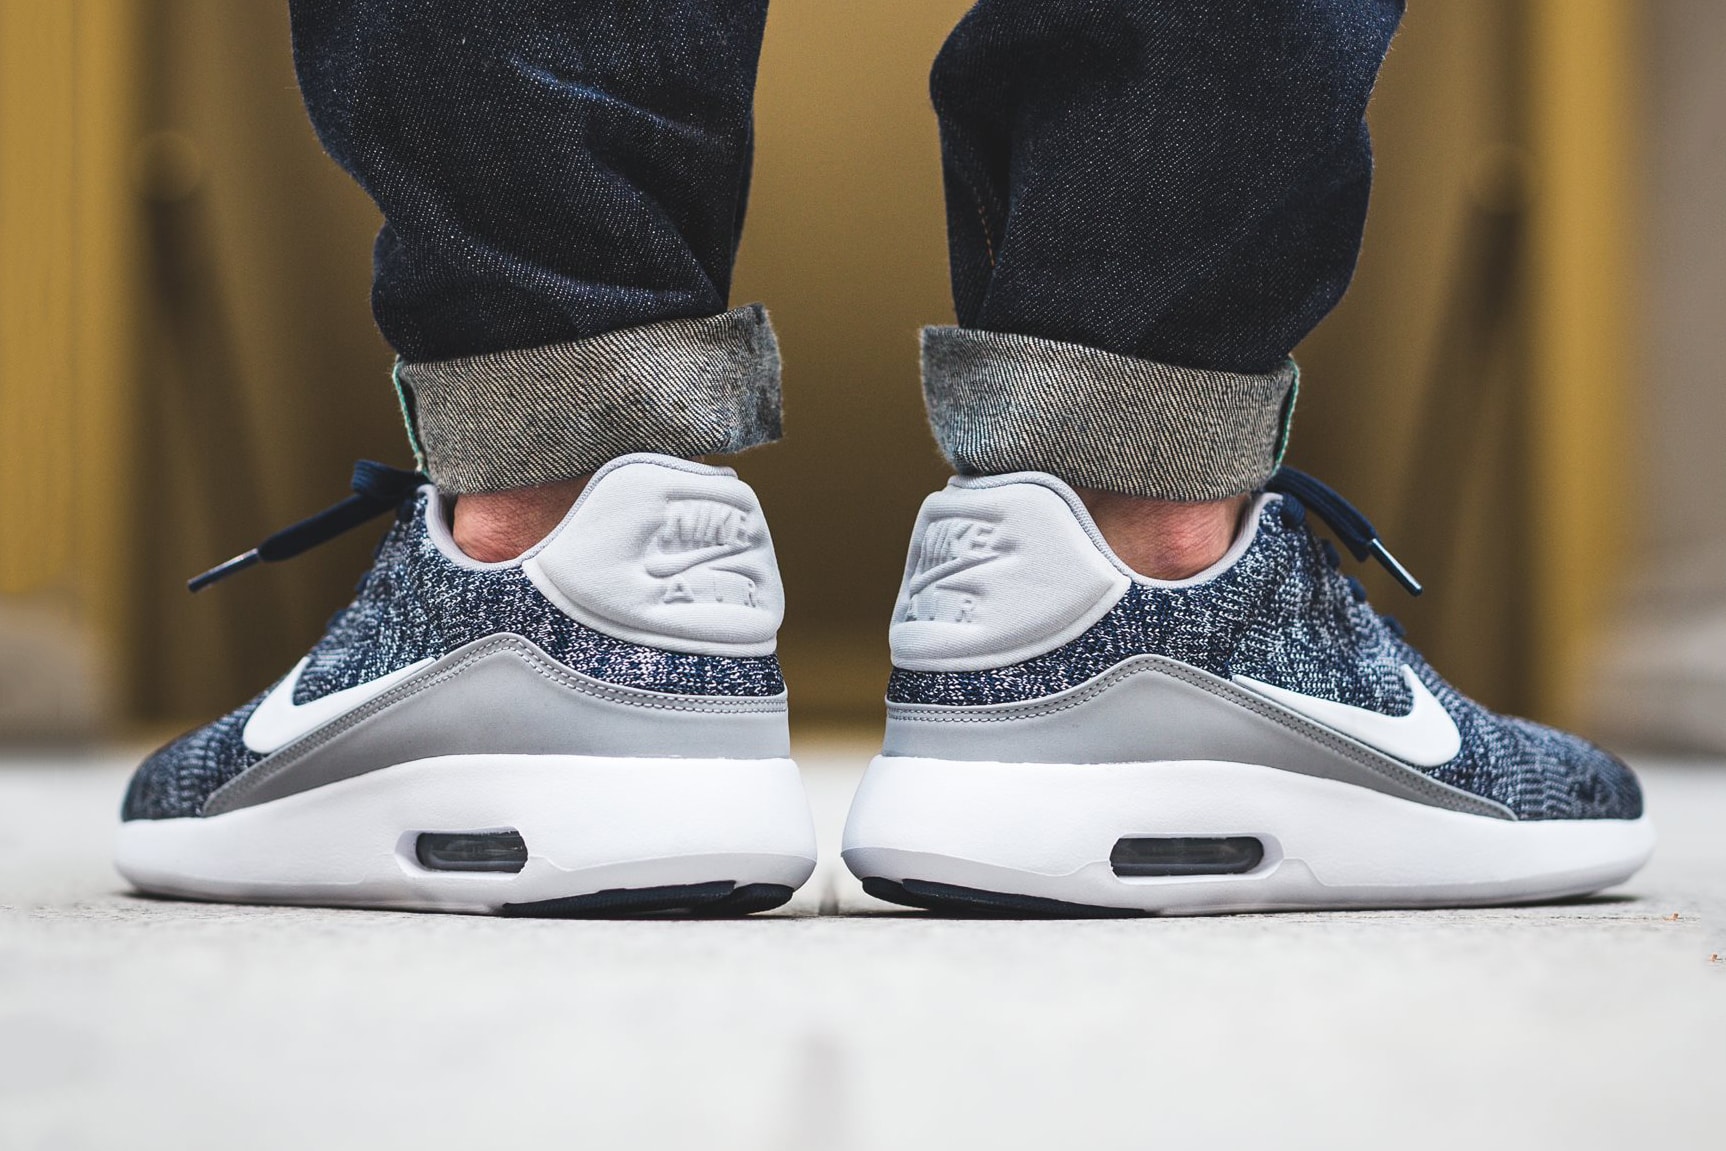 Nike Air Max Modern Flyknit "College Navy"